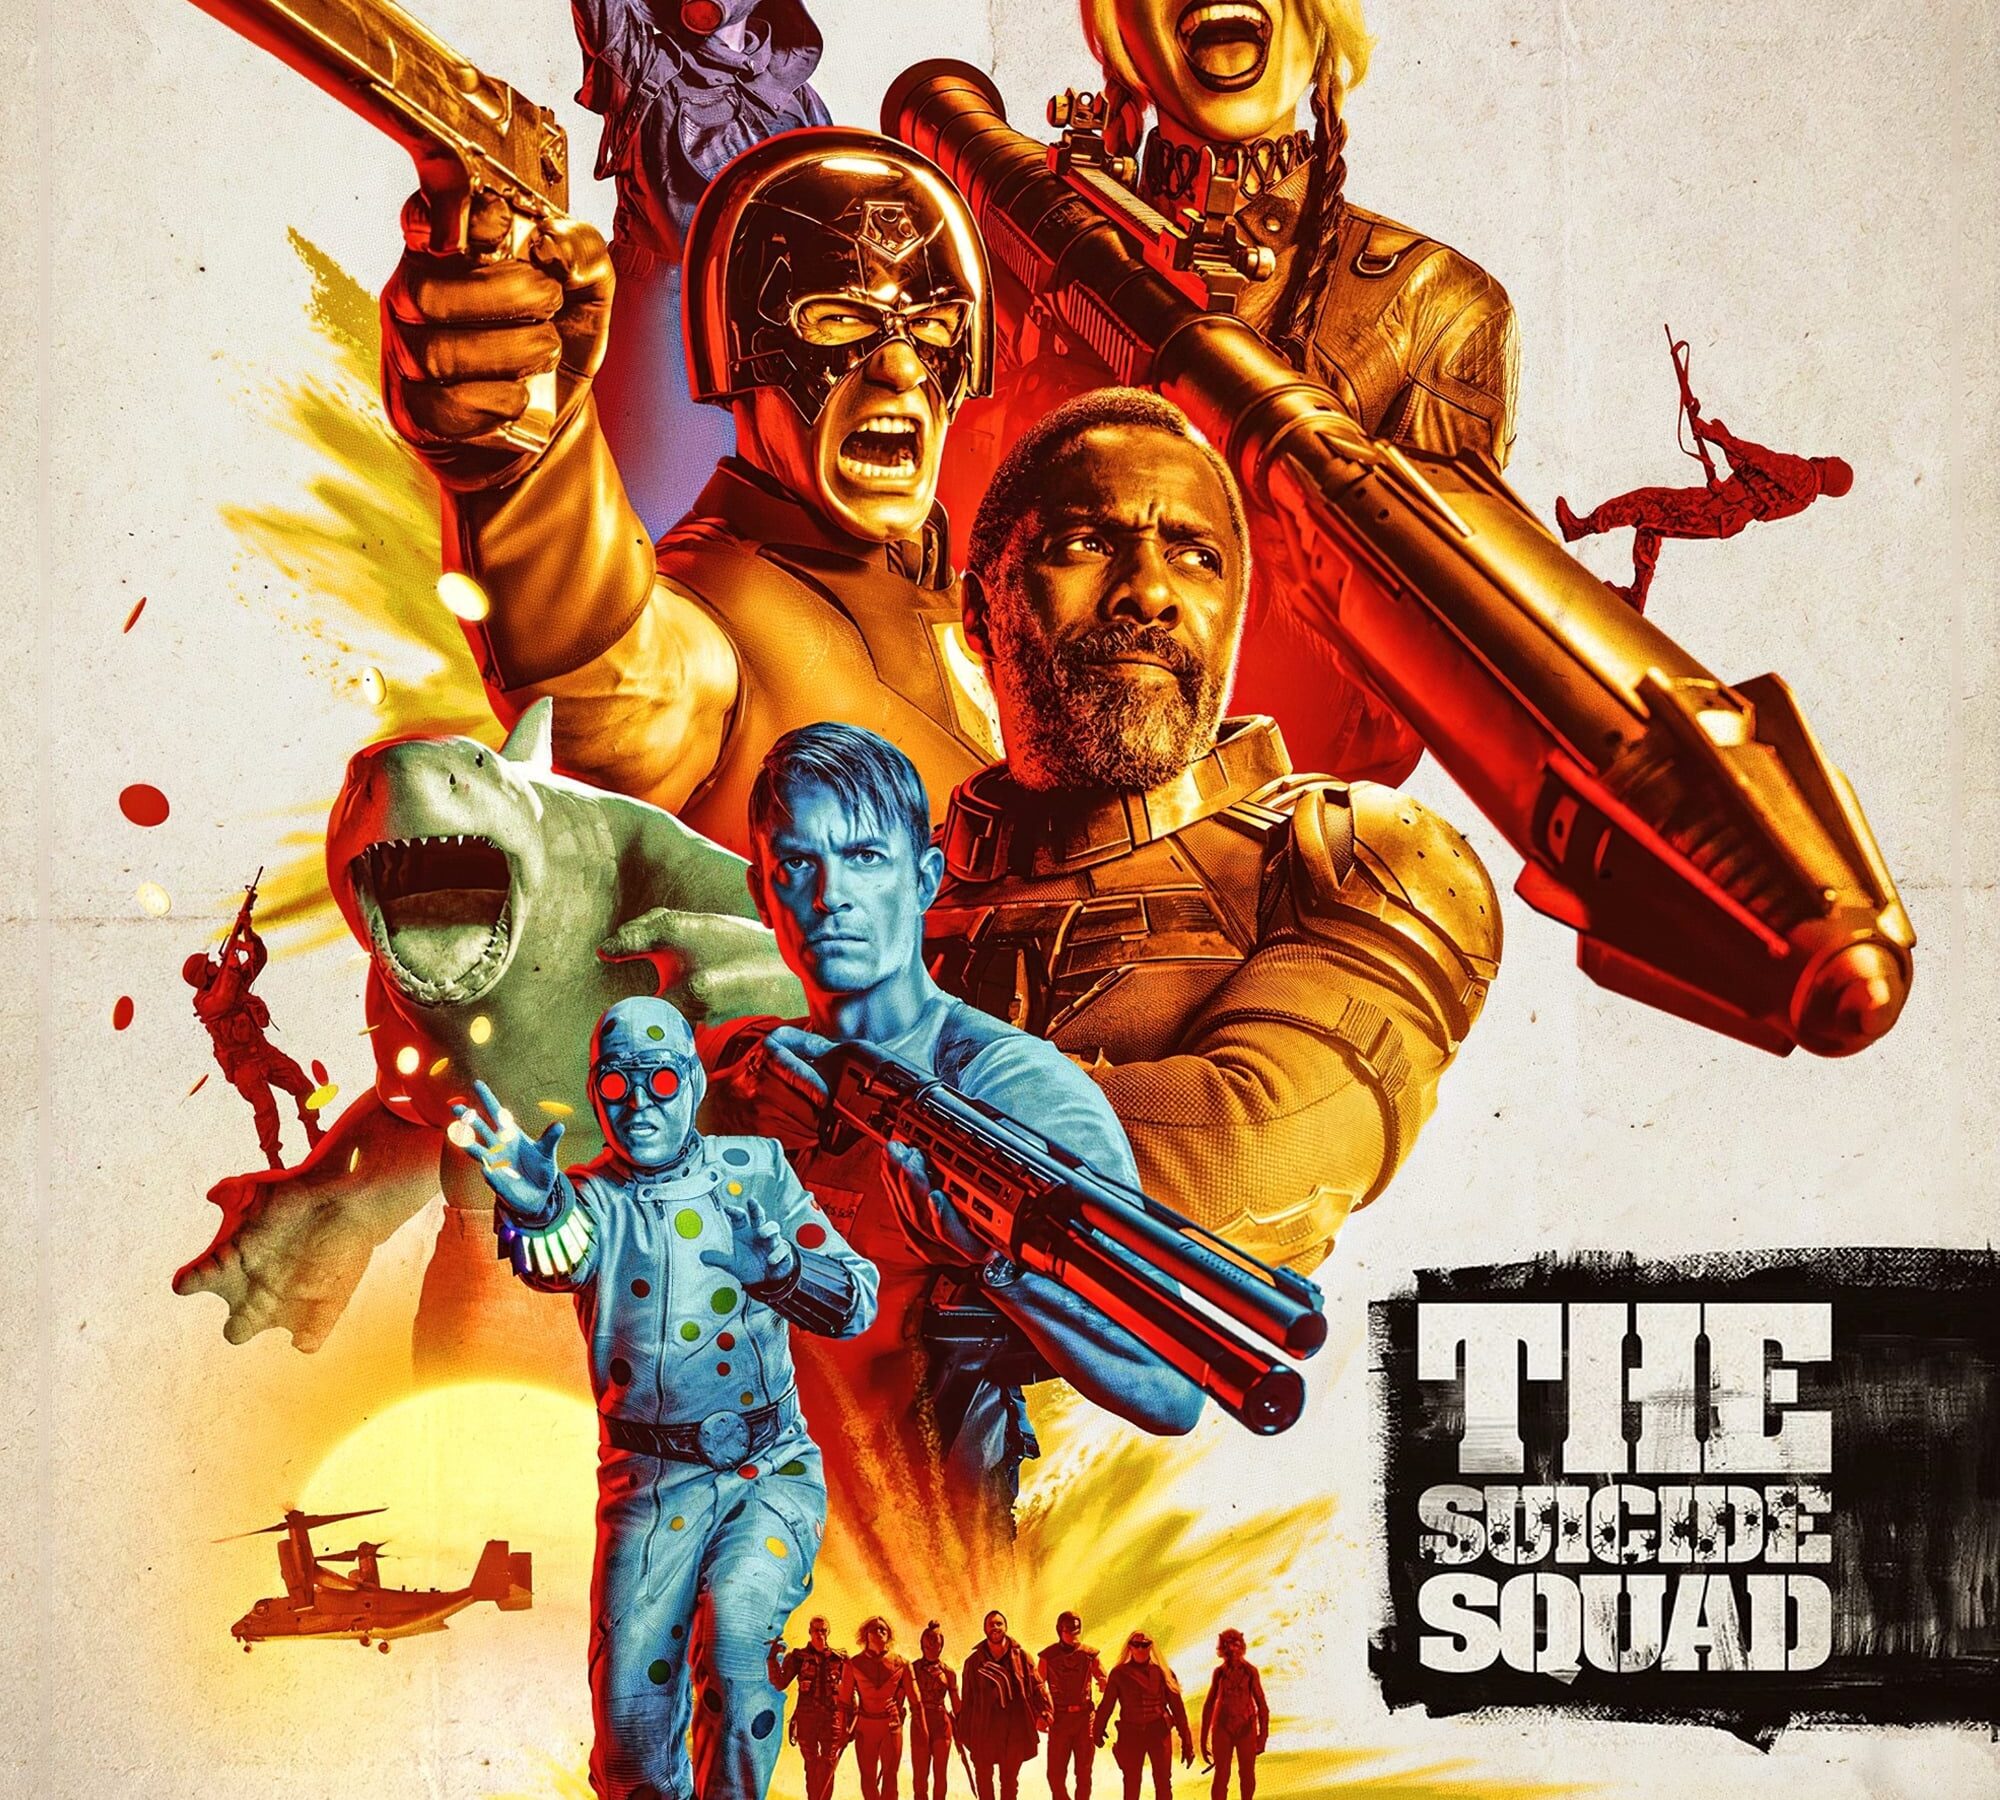 Poster for the movie "The Suicide Squad"